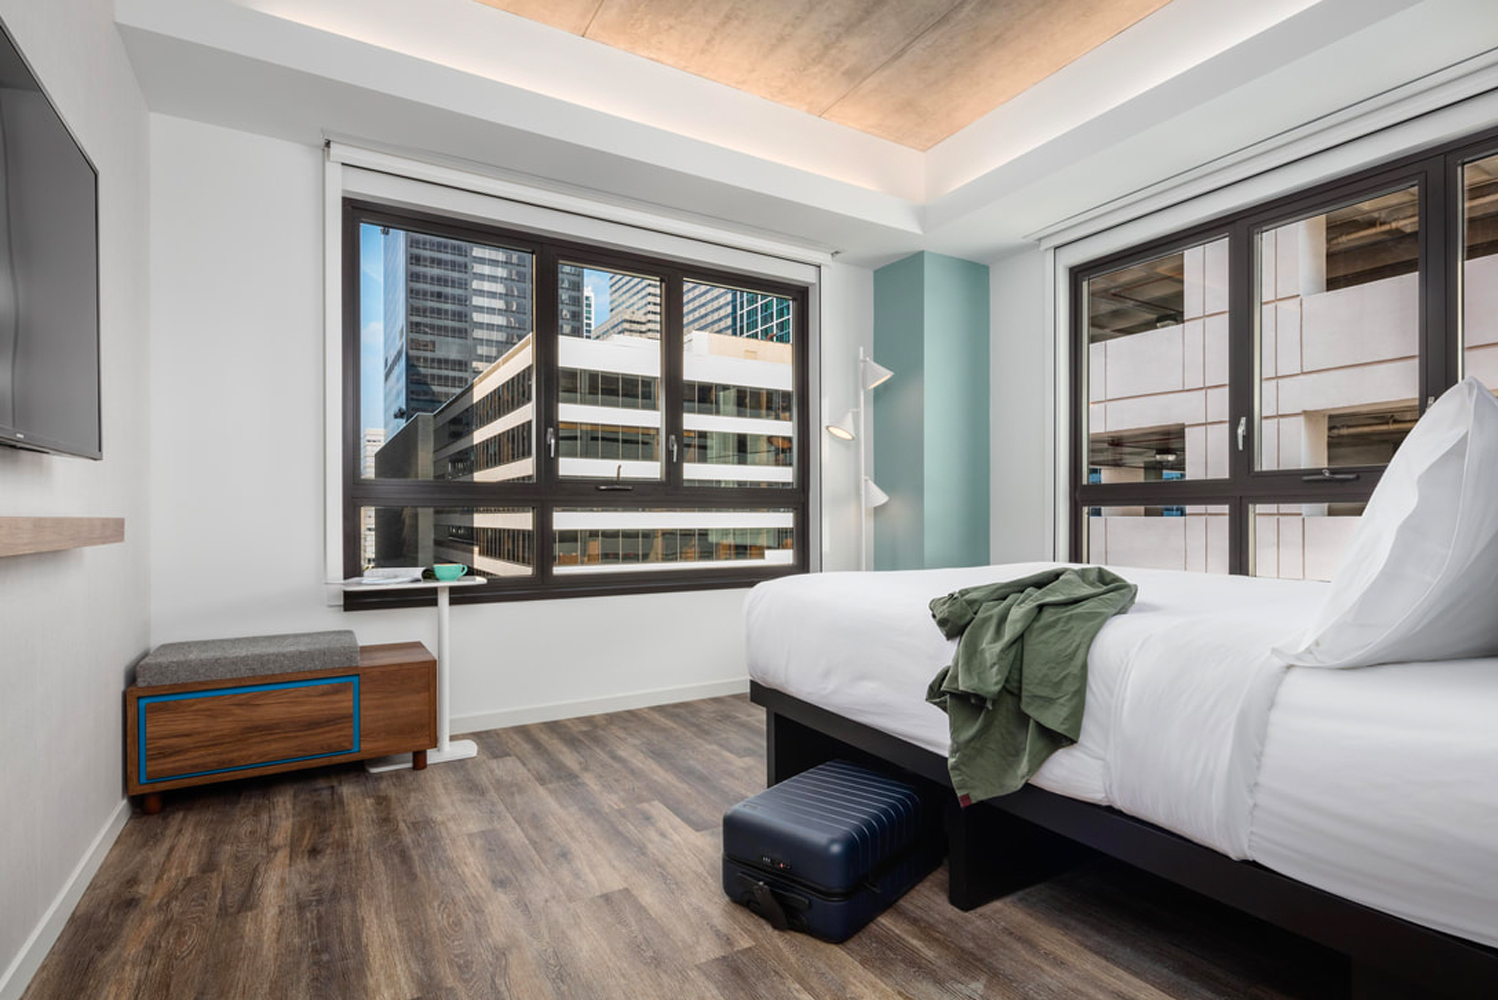 Pod Hotels continues its expansion adding Pod Philly to its portfolio as Philadelphias first-micro hotel